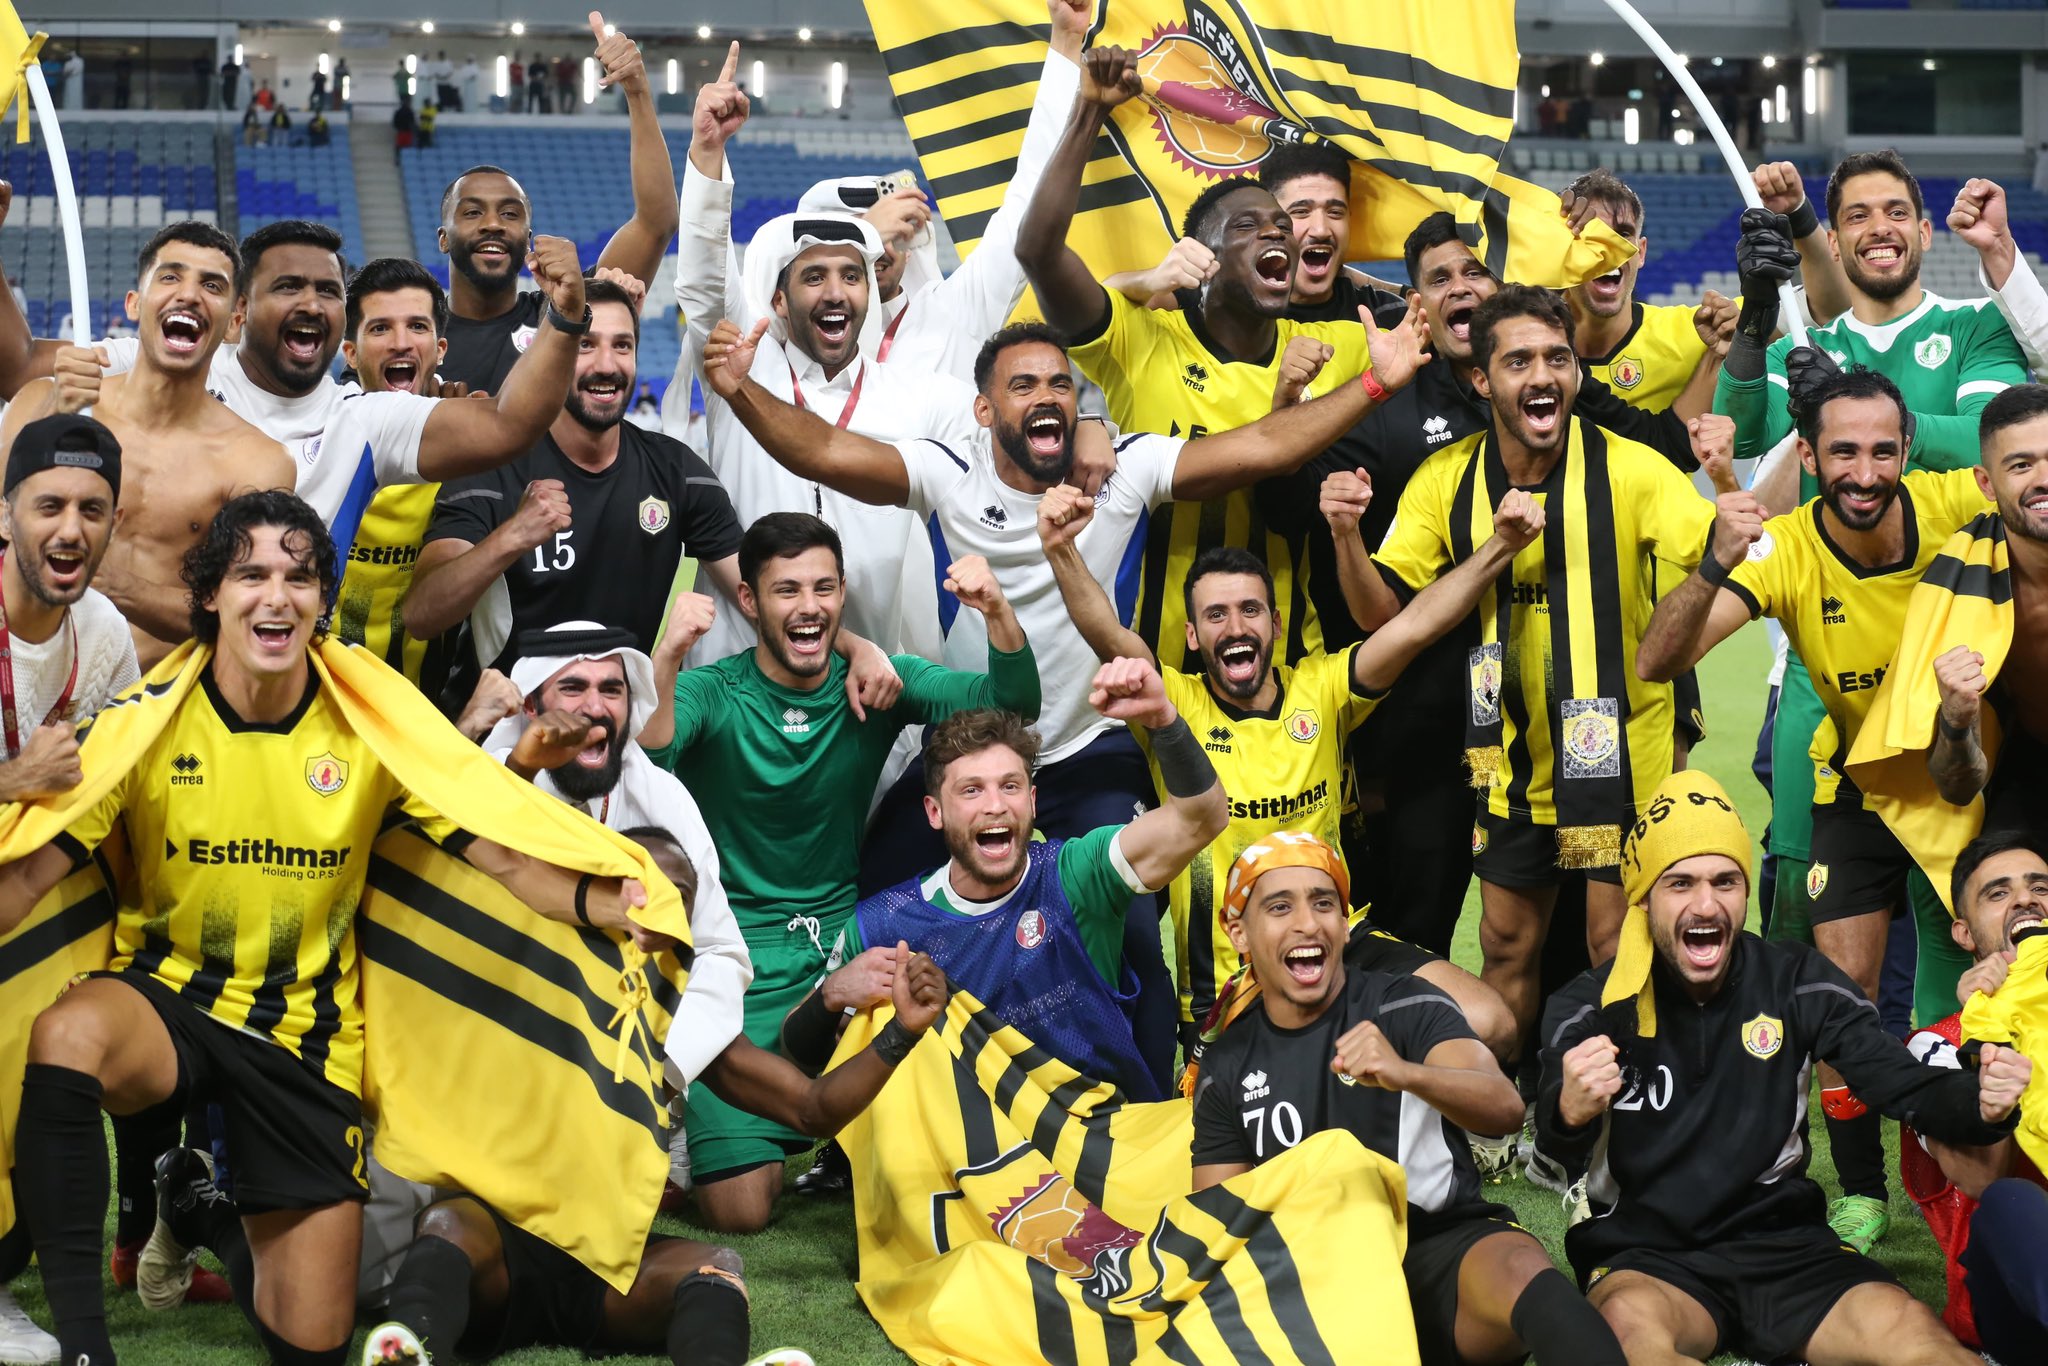 Qatar SC win in penalties to set up an Amir Cup final date with Al Sadd